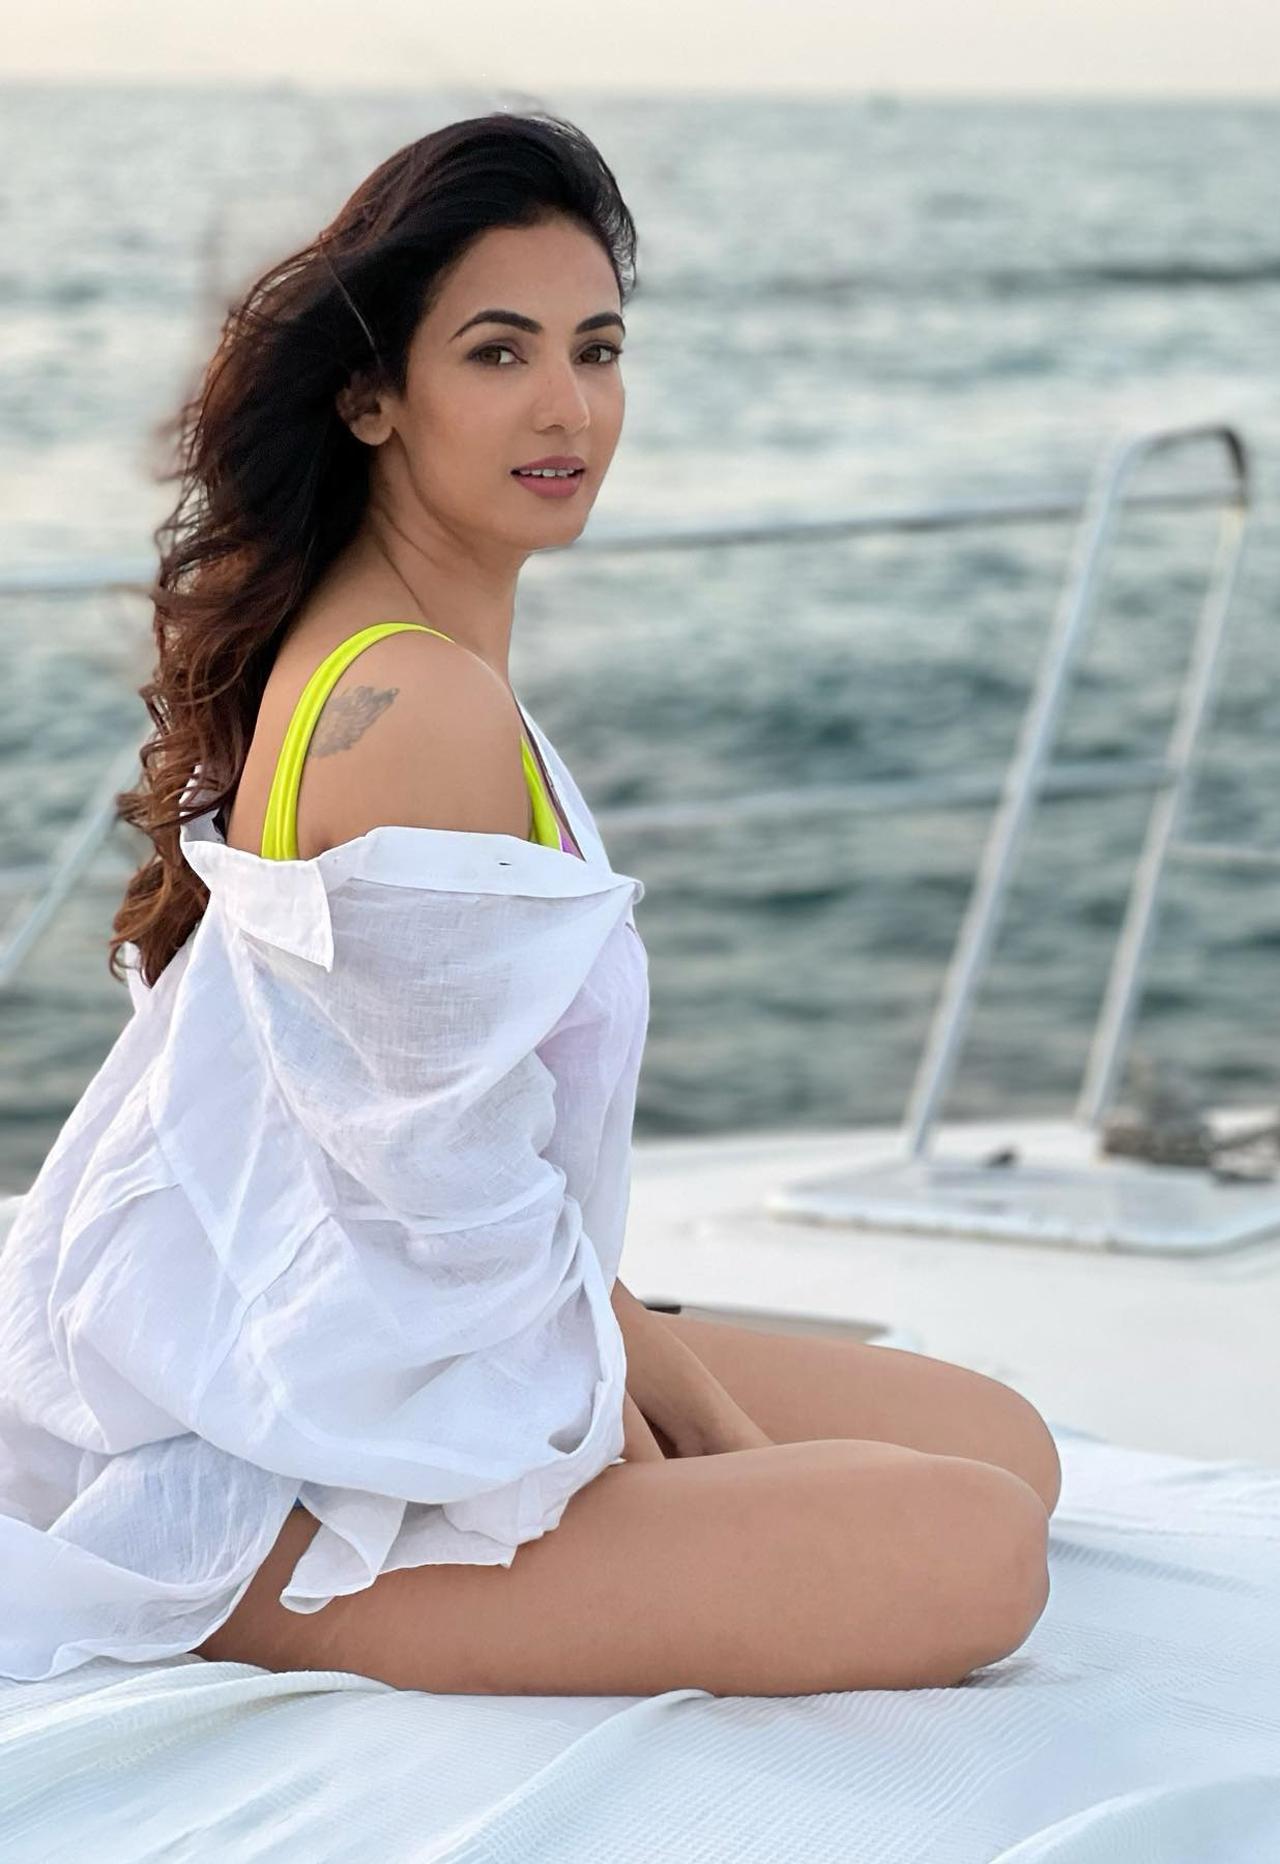 Nitin Ka Sex - Sonal Chauhan: Here's what the 35-year-old Jannat actress is up to